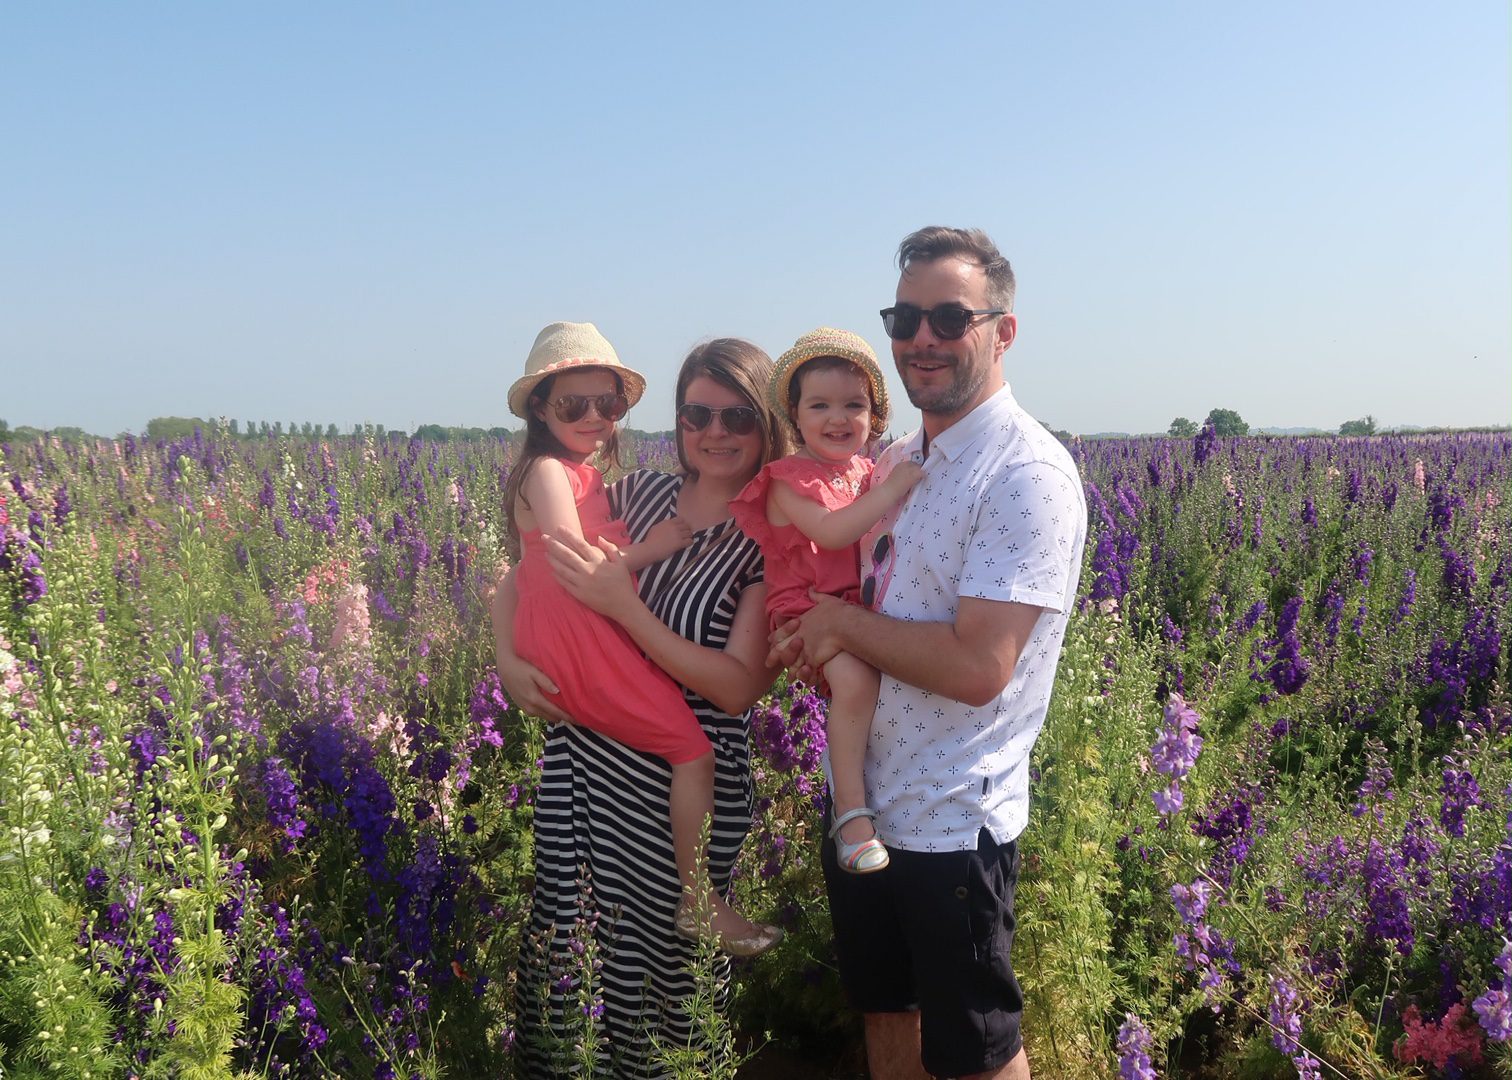 Our Morning at the Confetti Fields, Pershore